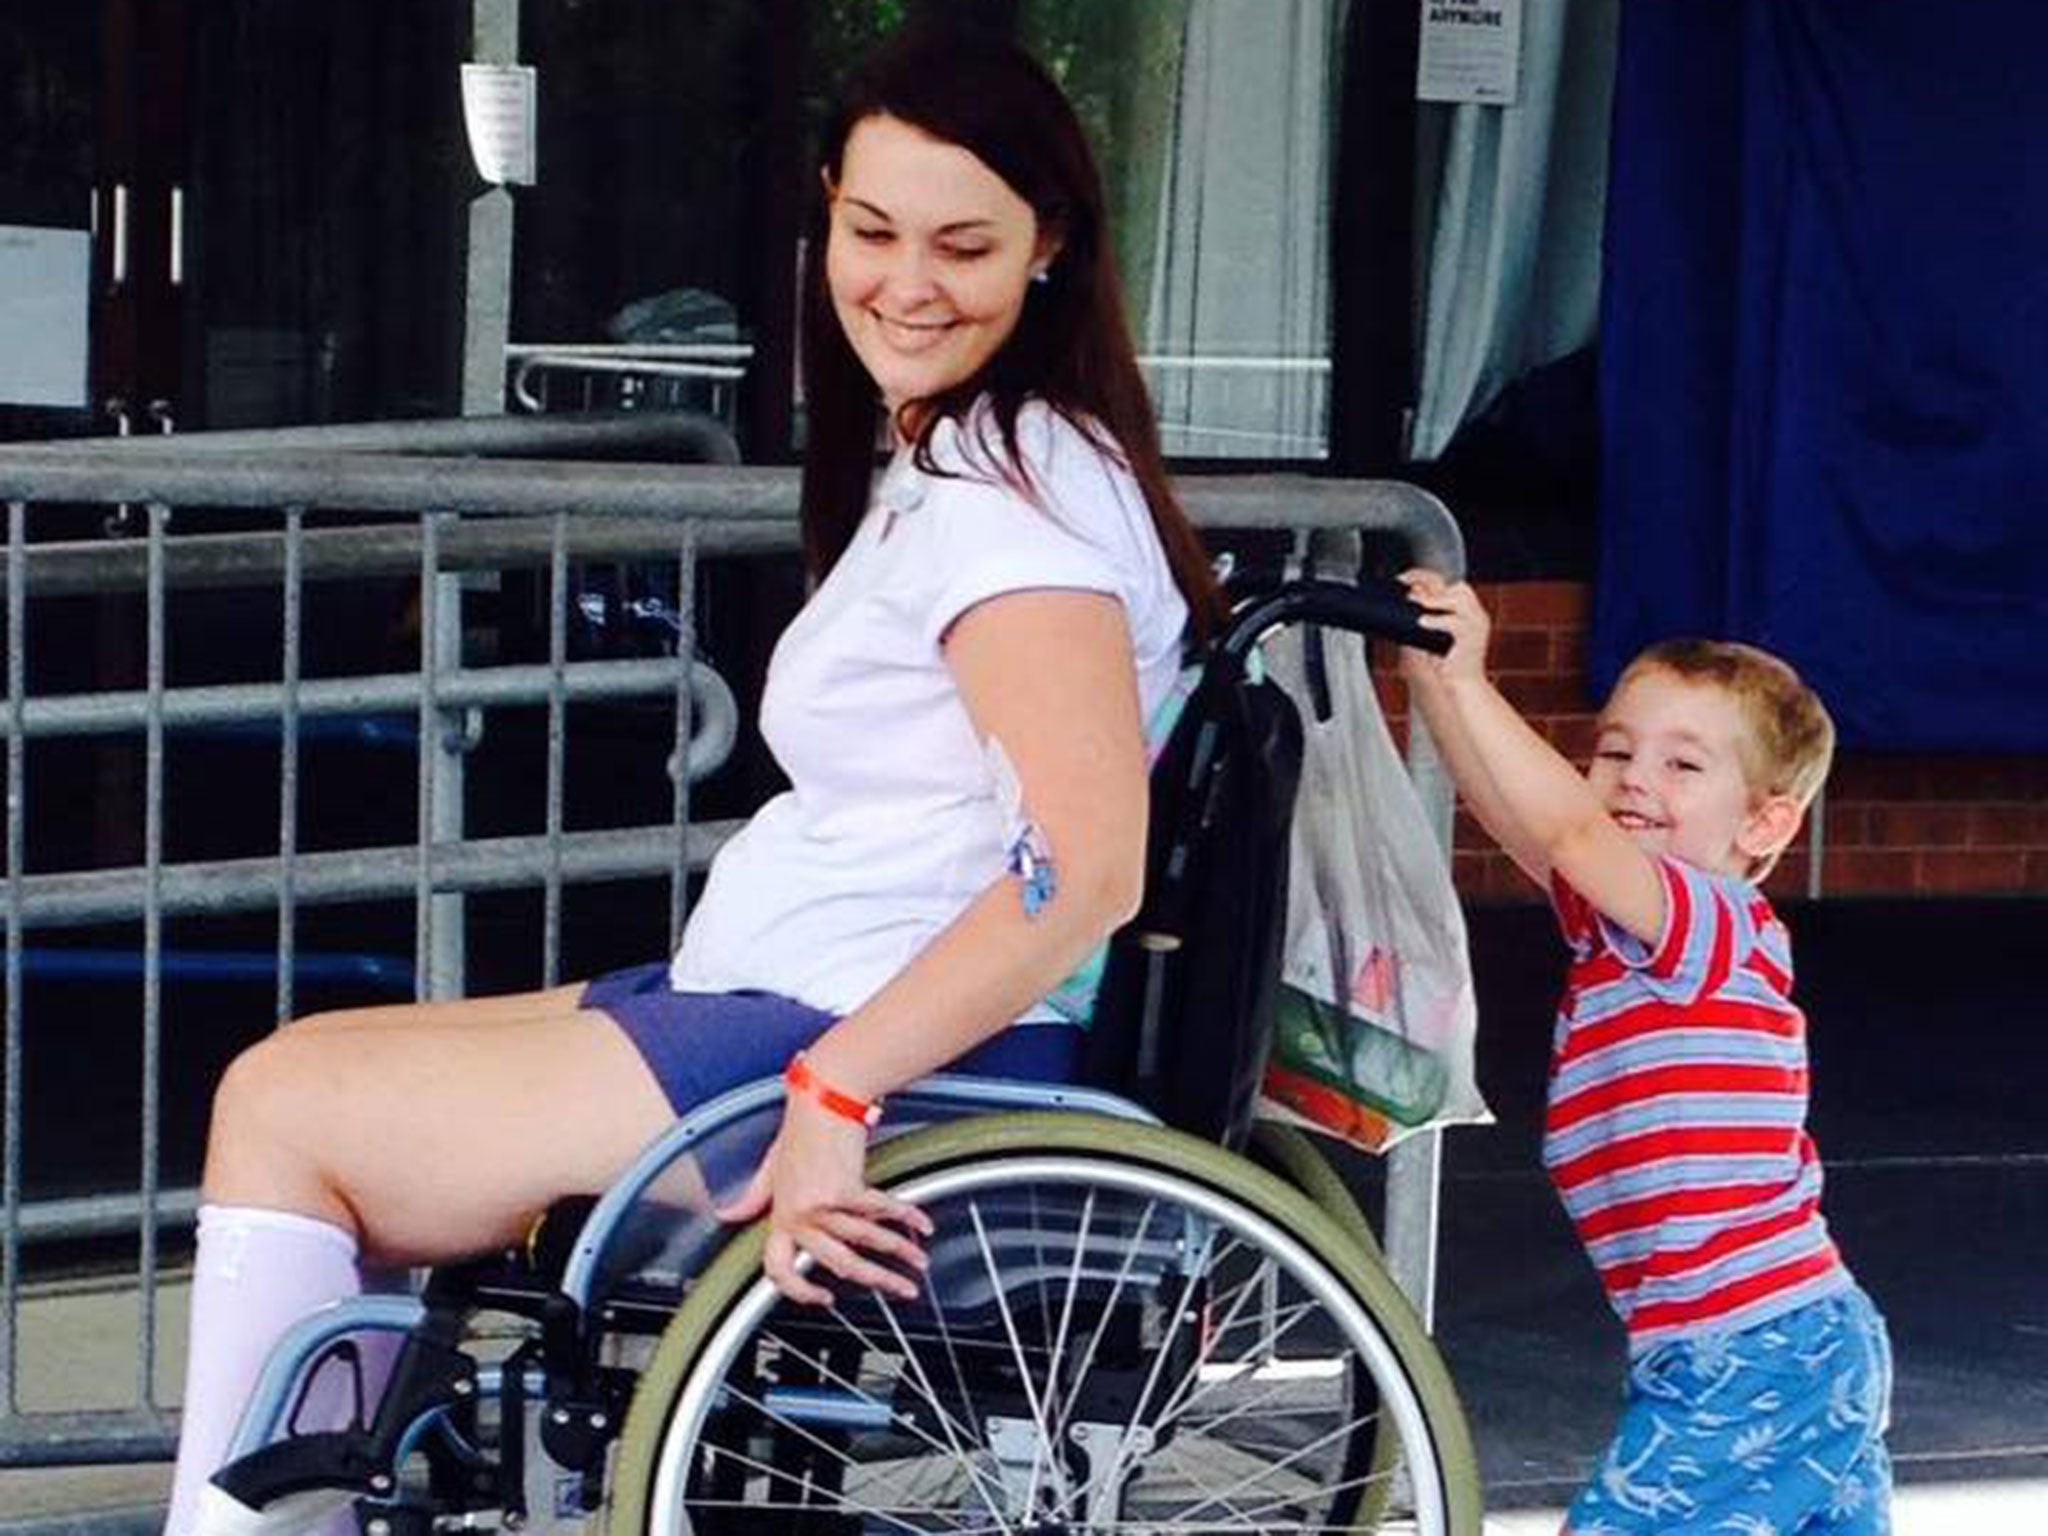 Jo Gilchrist must use a wheelchair after a staph infection attacked her spine.